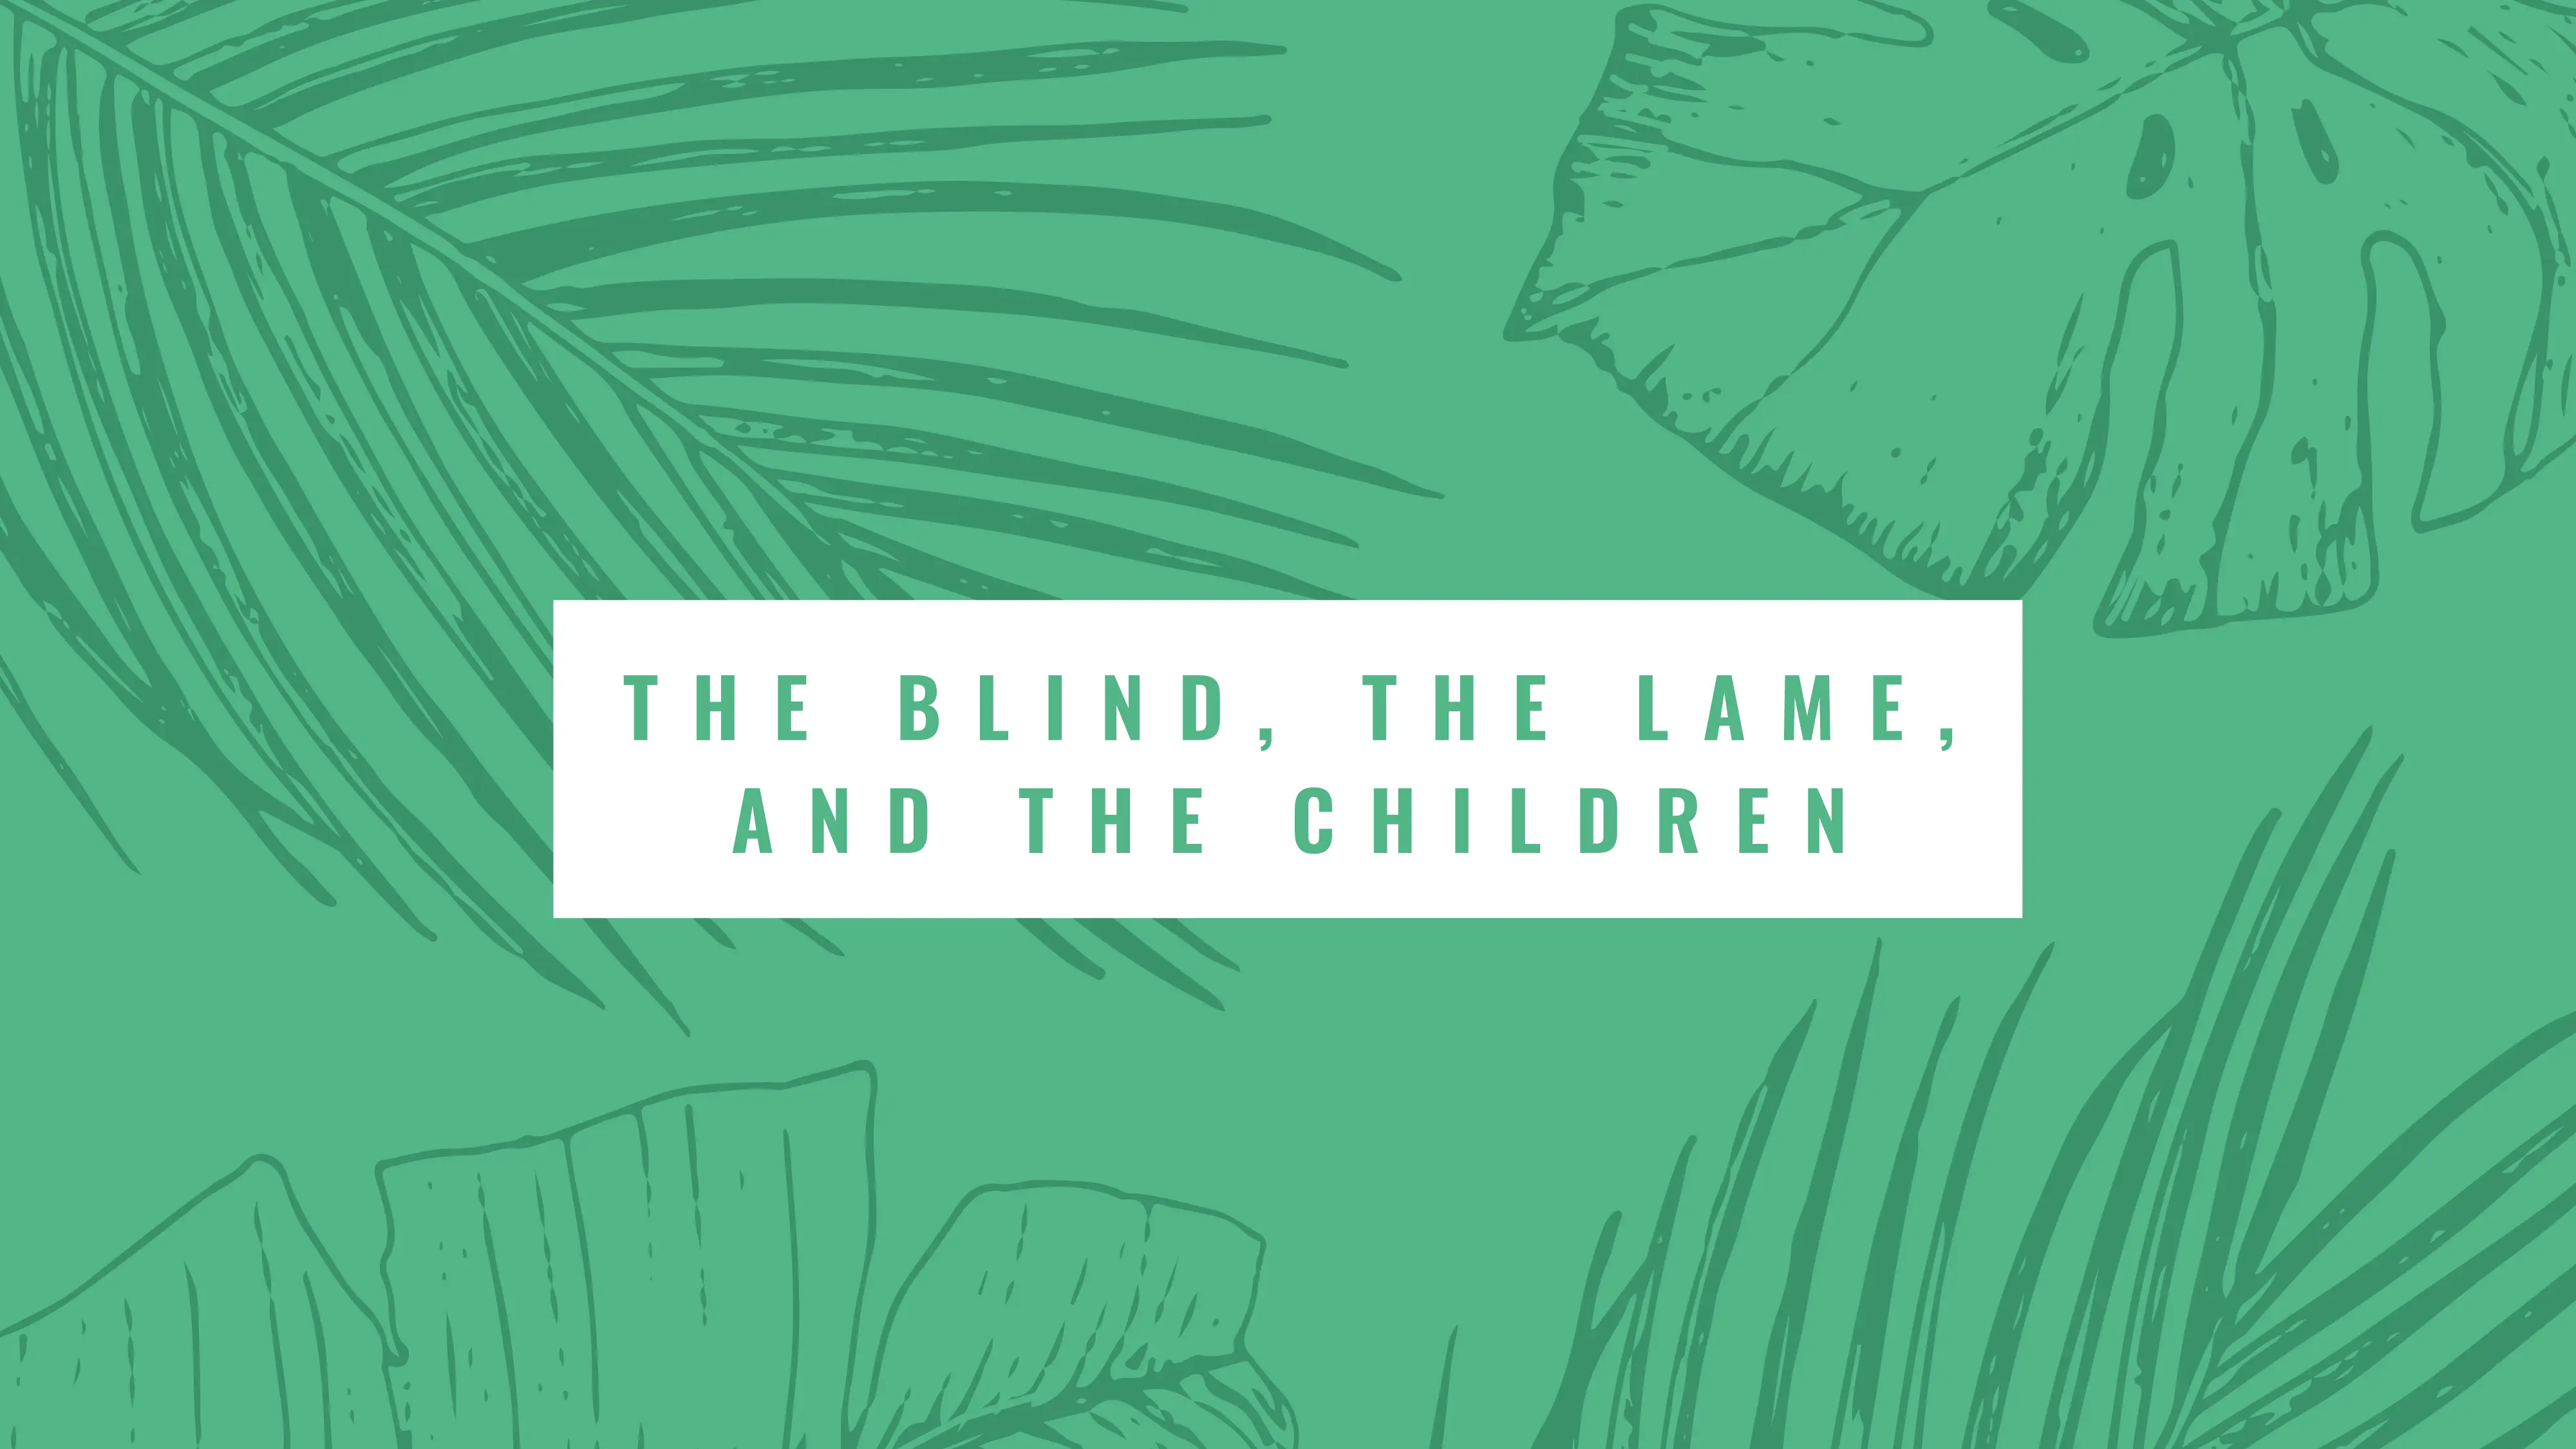 Featured image for “The Blind, The Lame, and The Children”